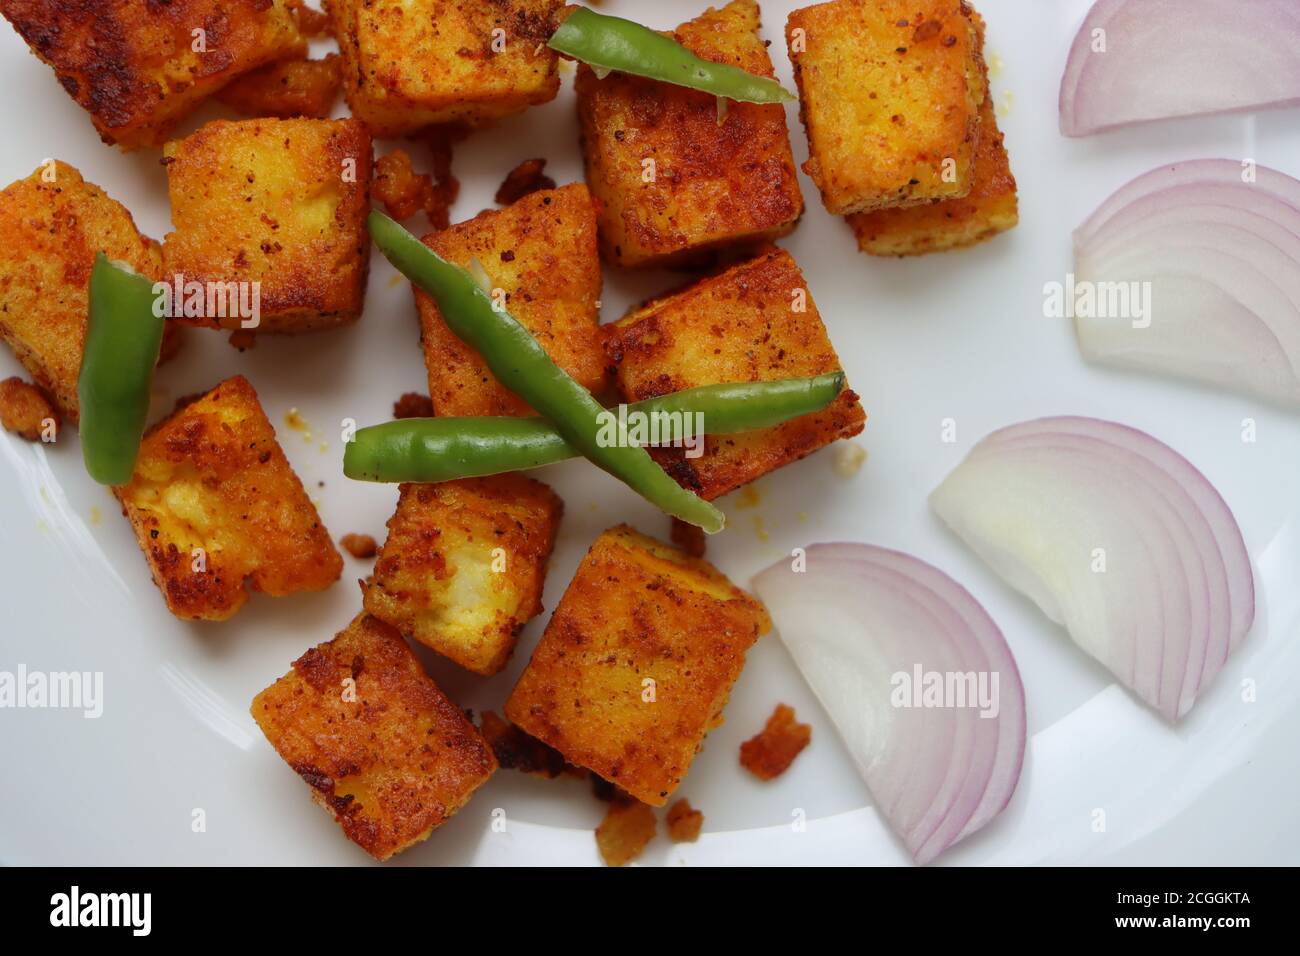 Tawa paneer or pan fried Paneer, Indian starter made with cottage cheese and spices, appetizer Stock Photo